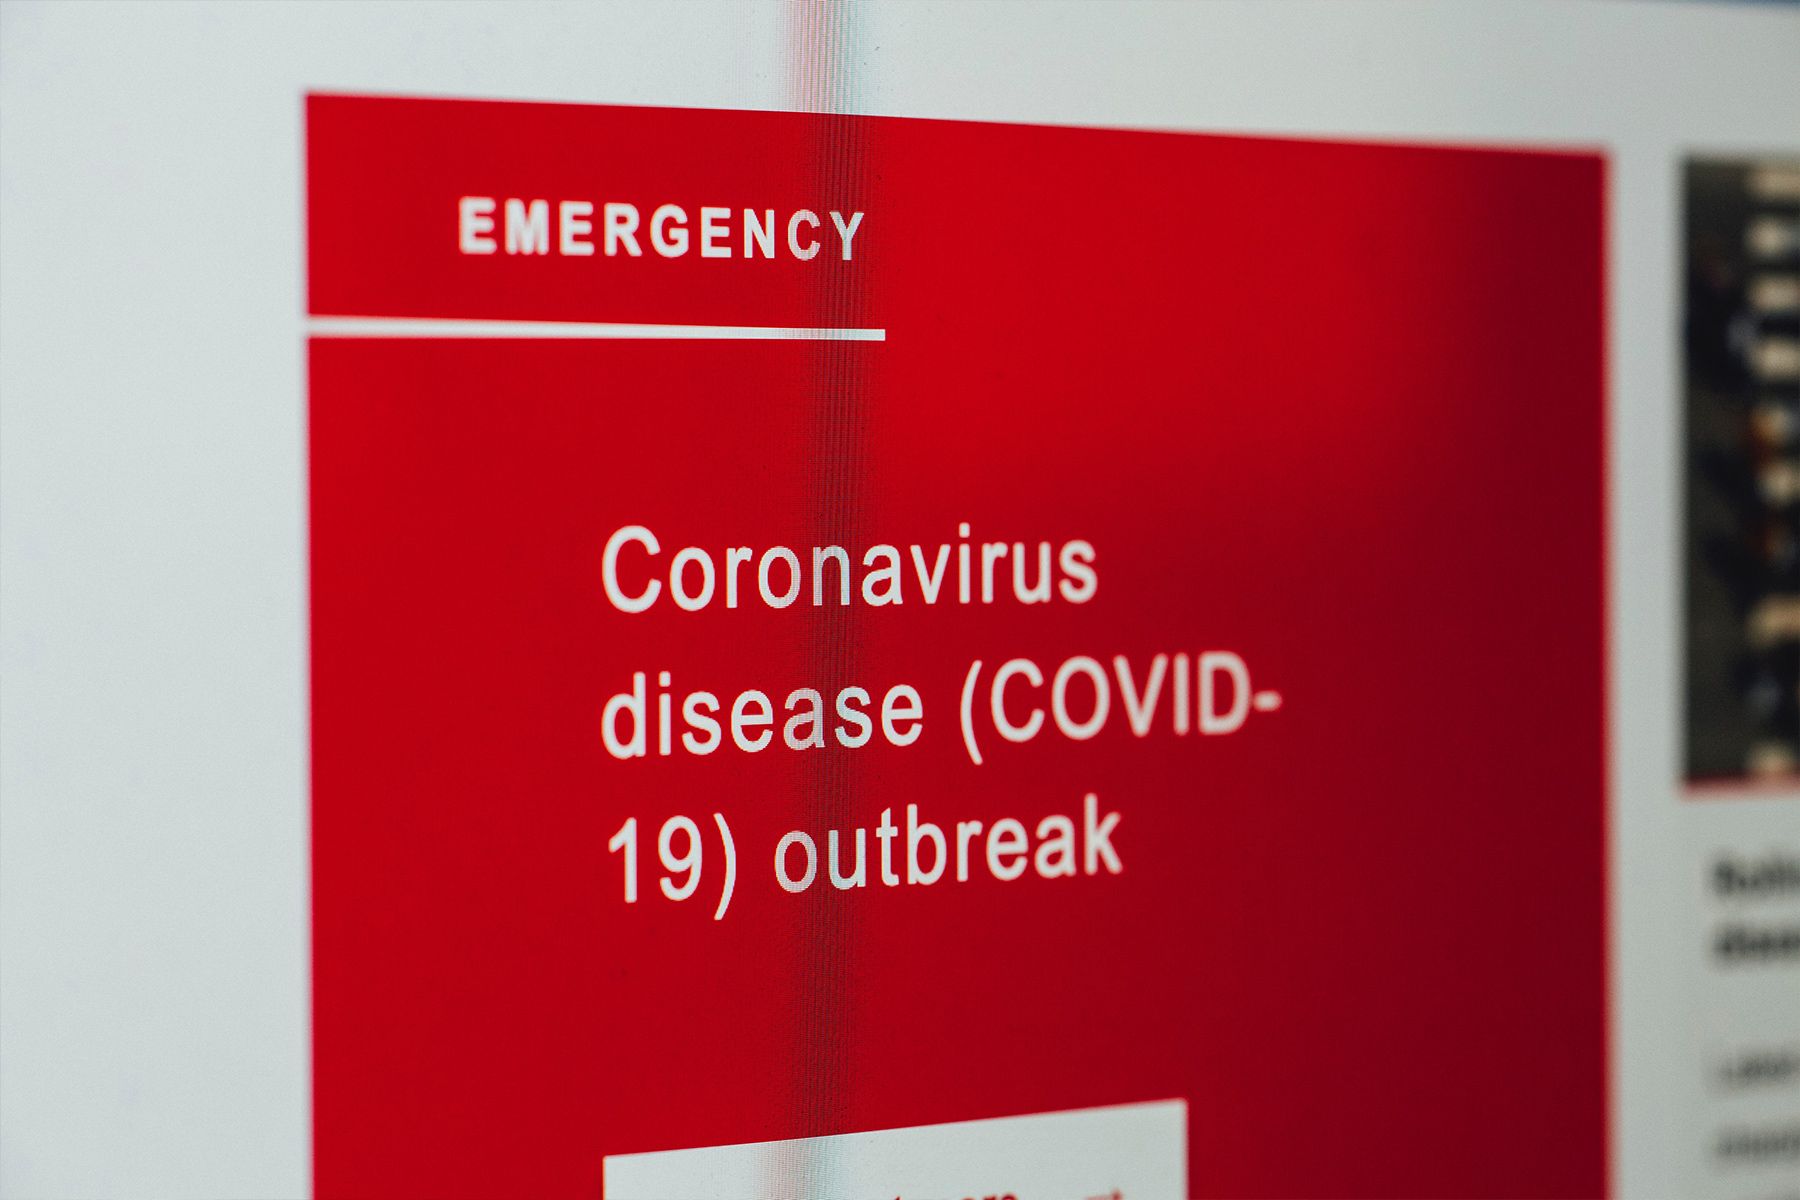 Metabolic Syndrome Ups Odds of ARDS, Death in COVID-19